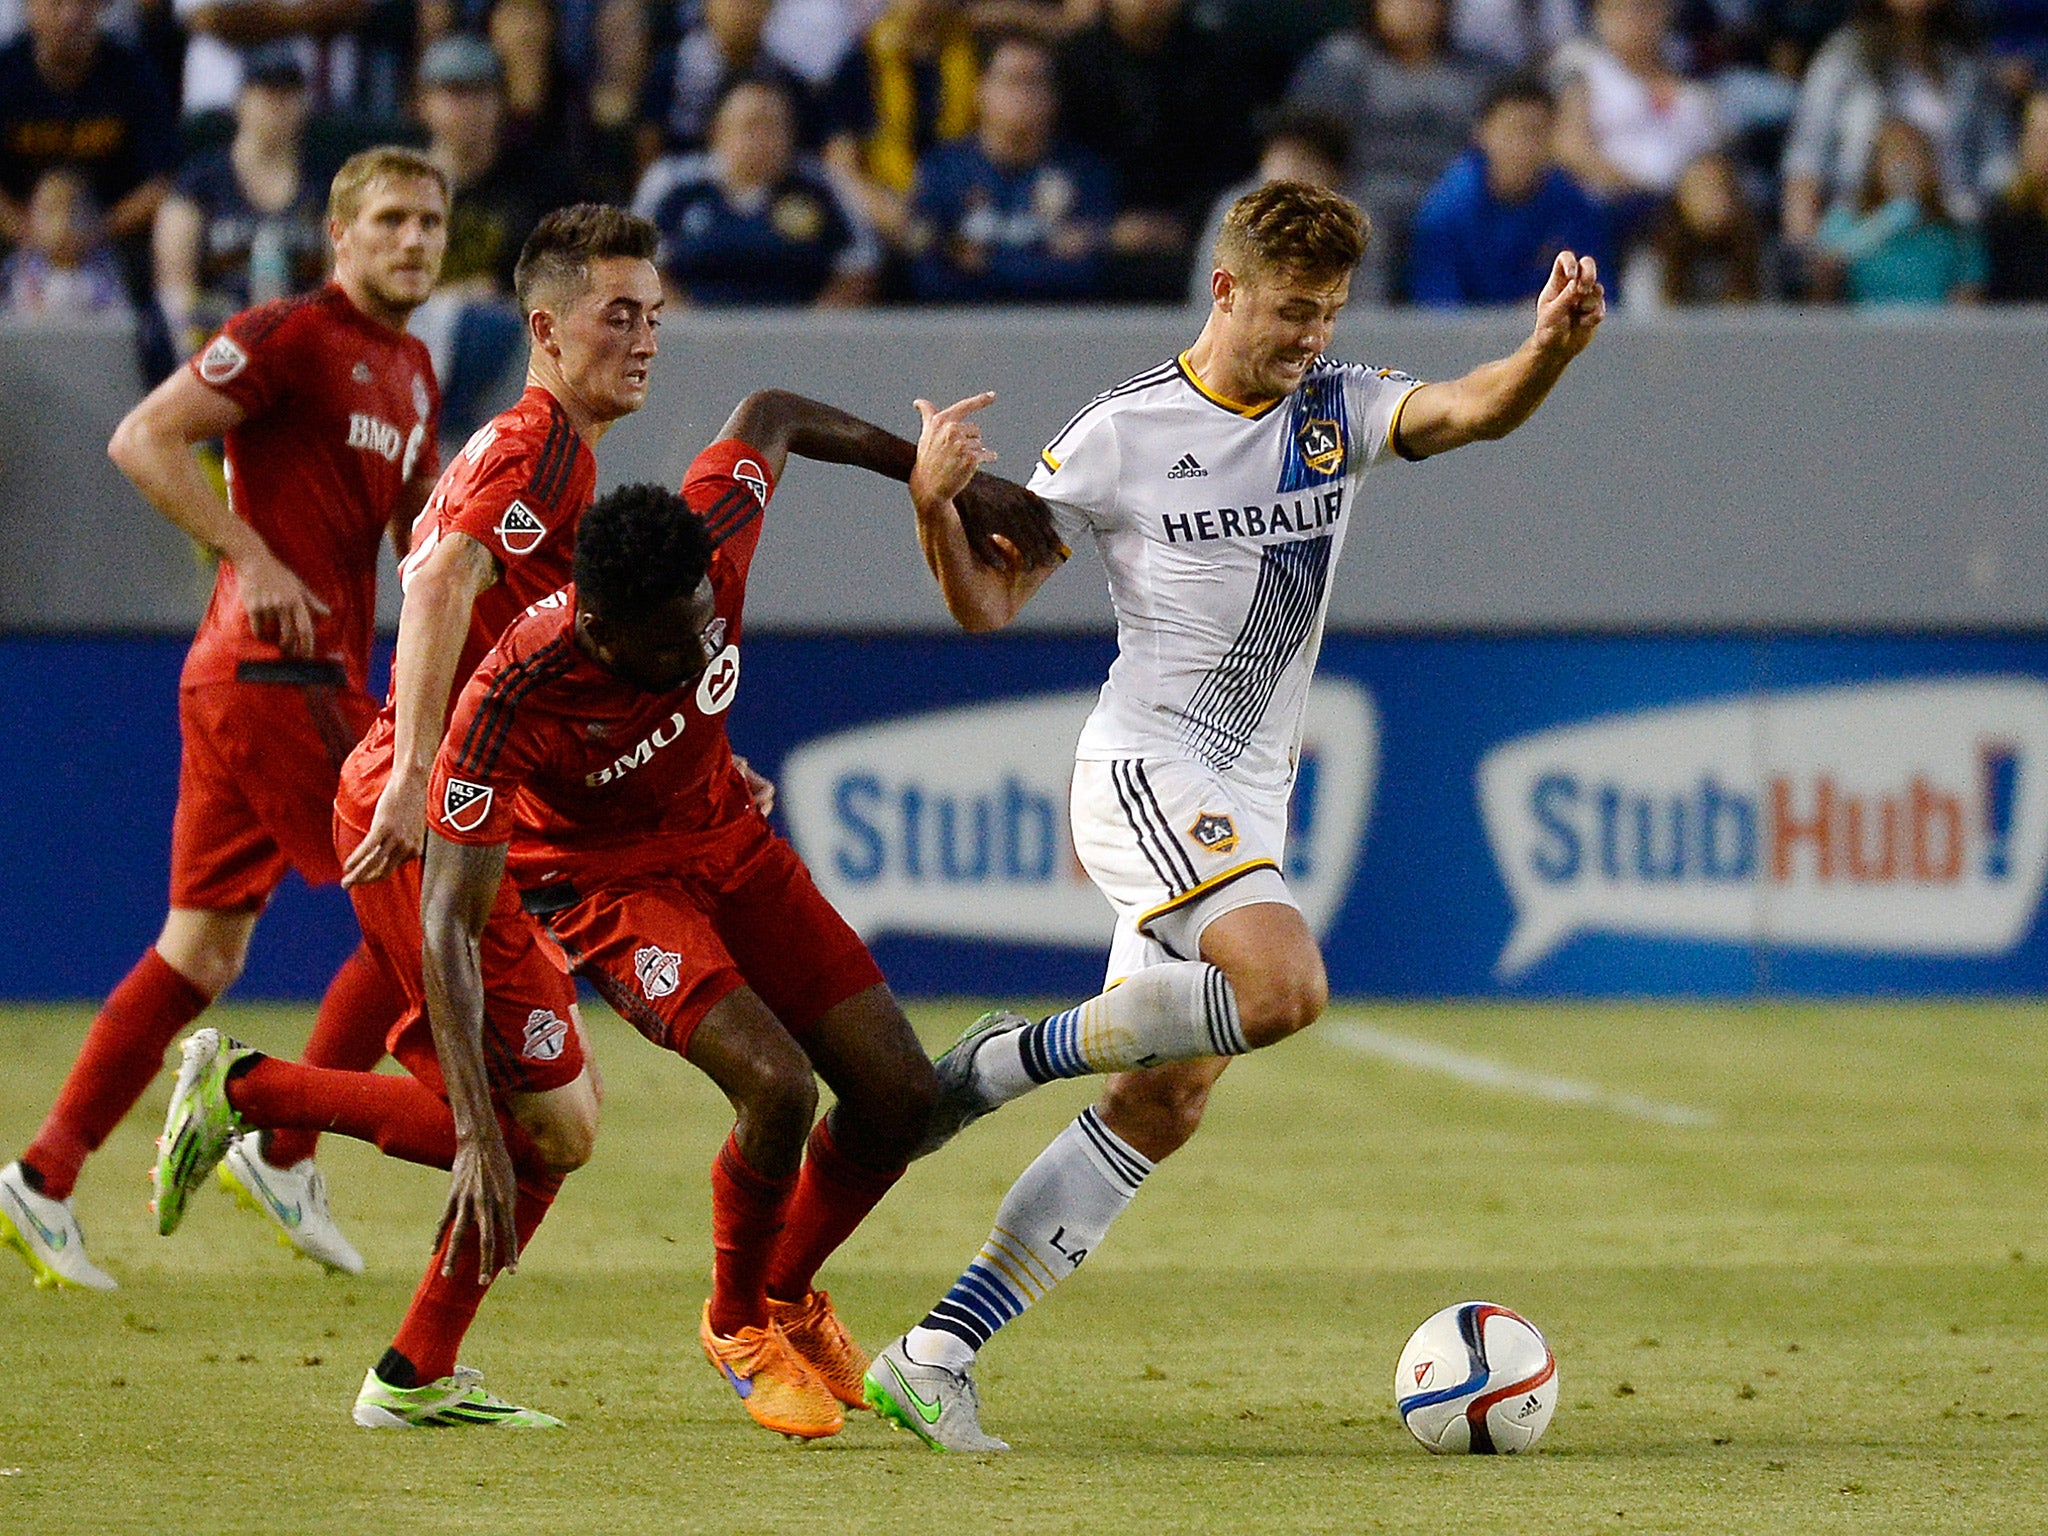 Robbie Rogers said he had not faced any homophobic slurs in the four years since he returned to the MLS